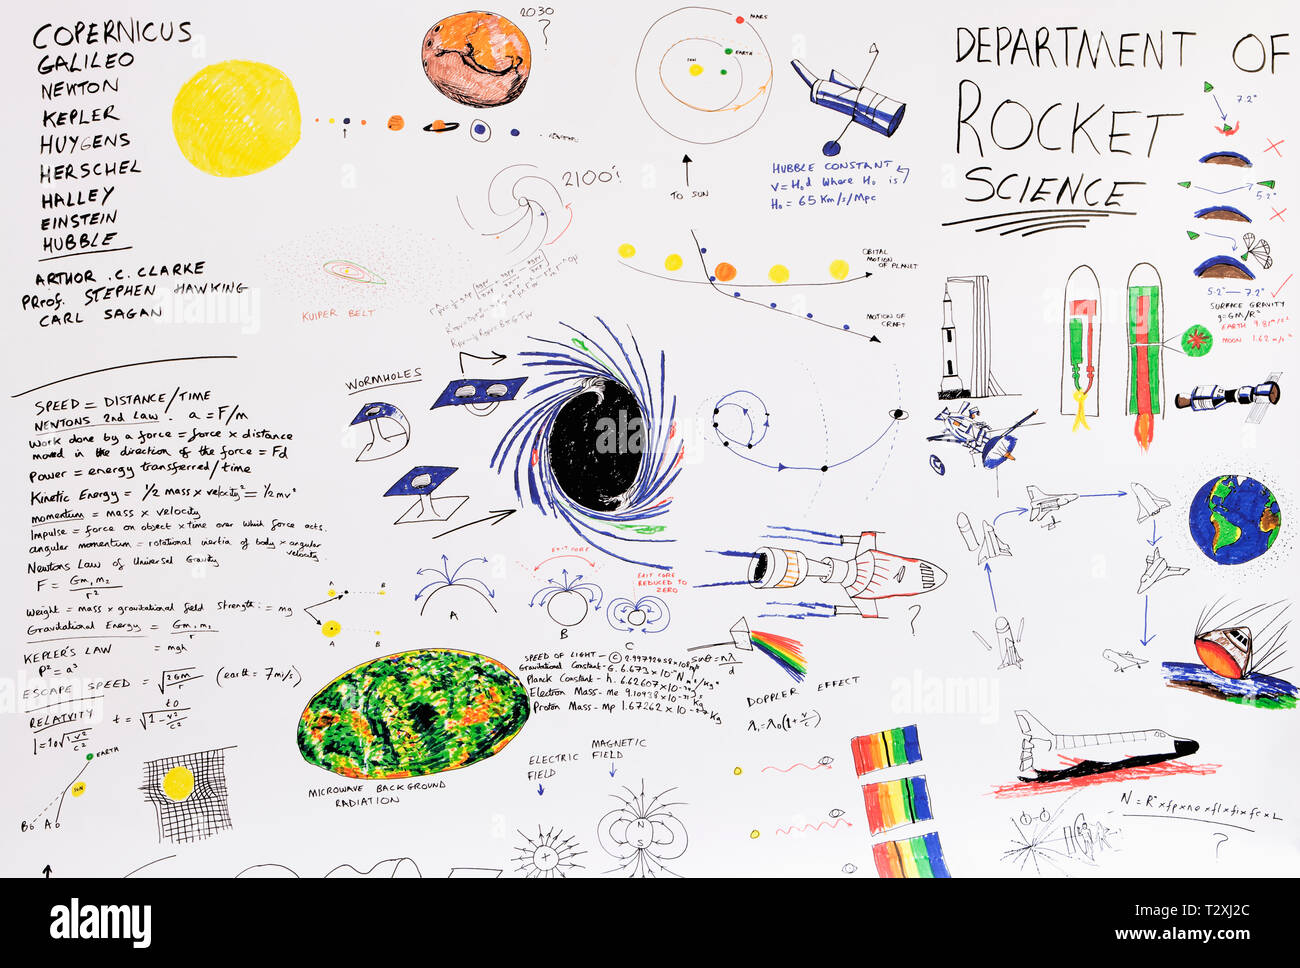 A collection of astronomy drawings on a wall department of rocket science Stock Photo